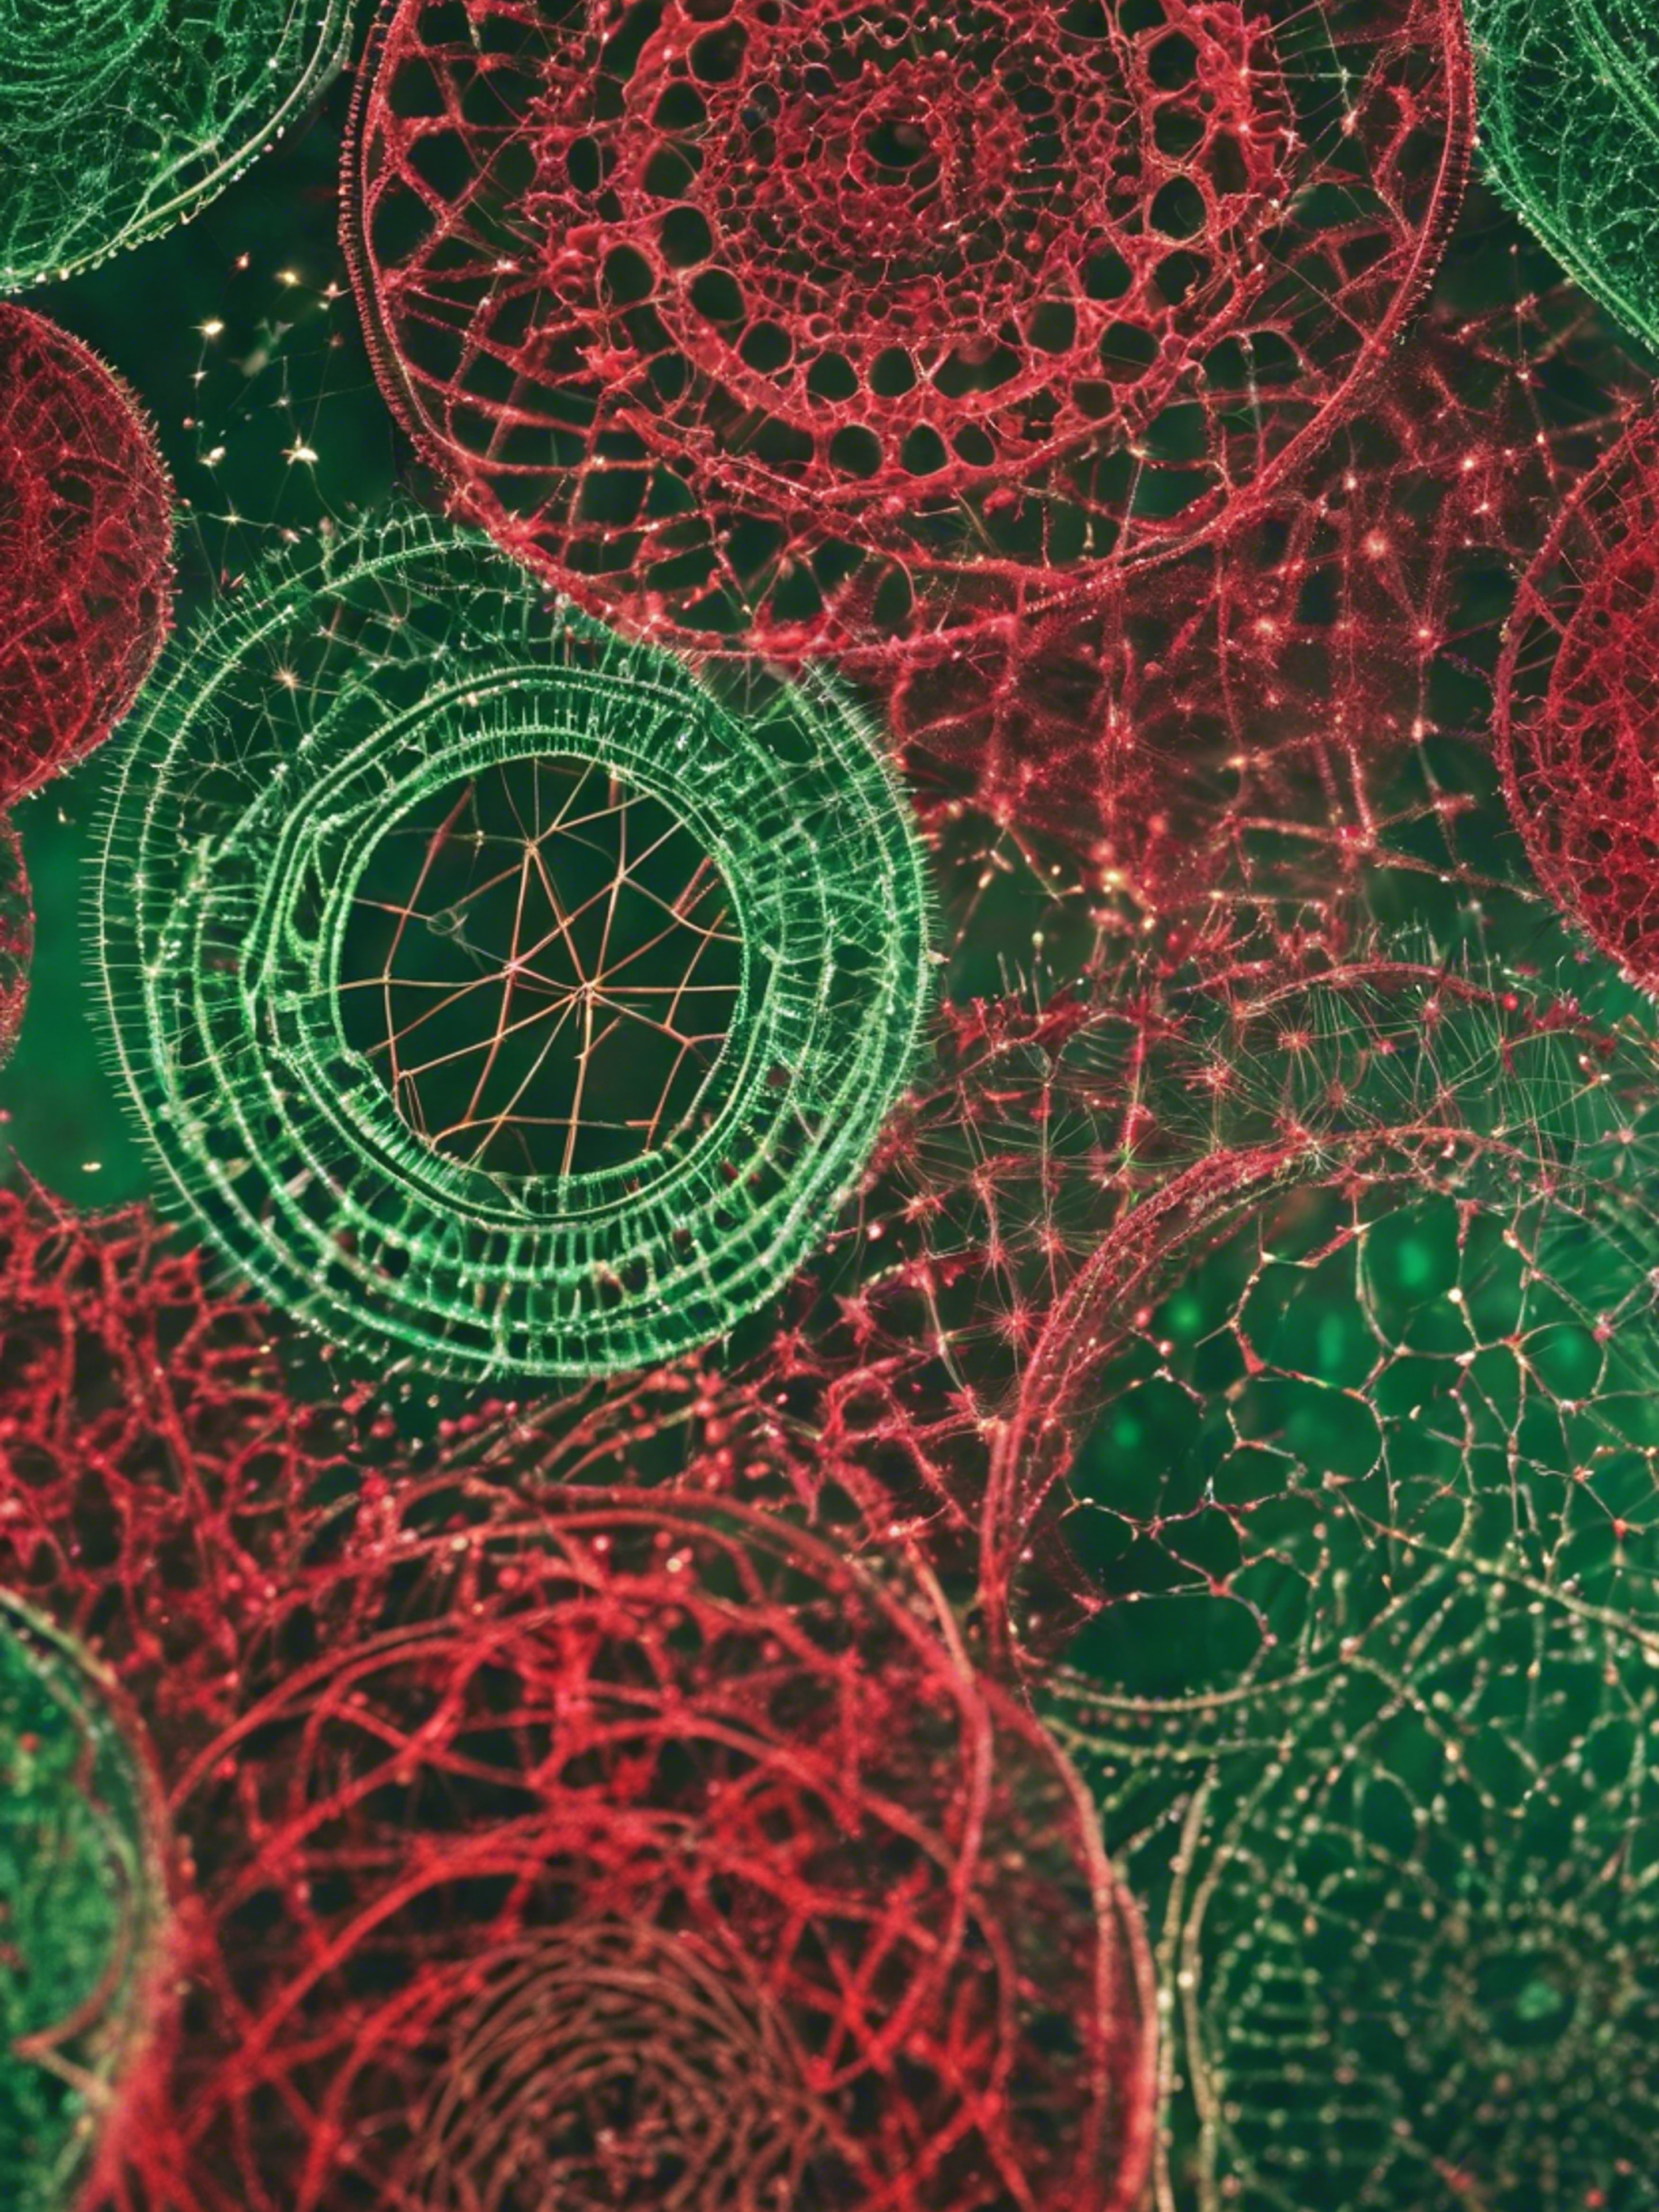 Red and green glitter forming a spirograph pattern Hintergrund[8dd03403d83d45f69b51]